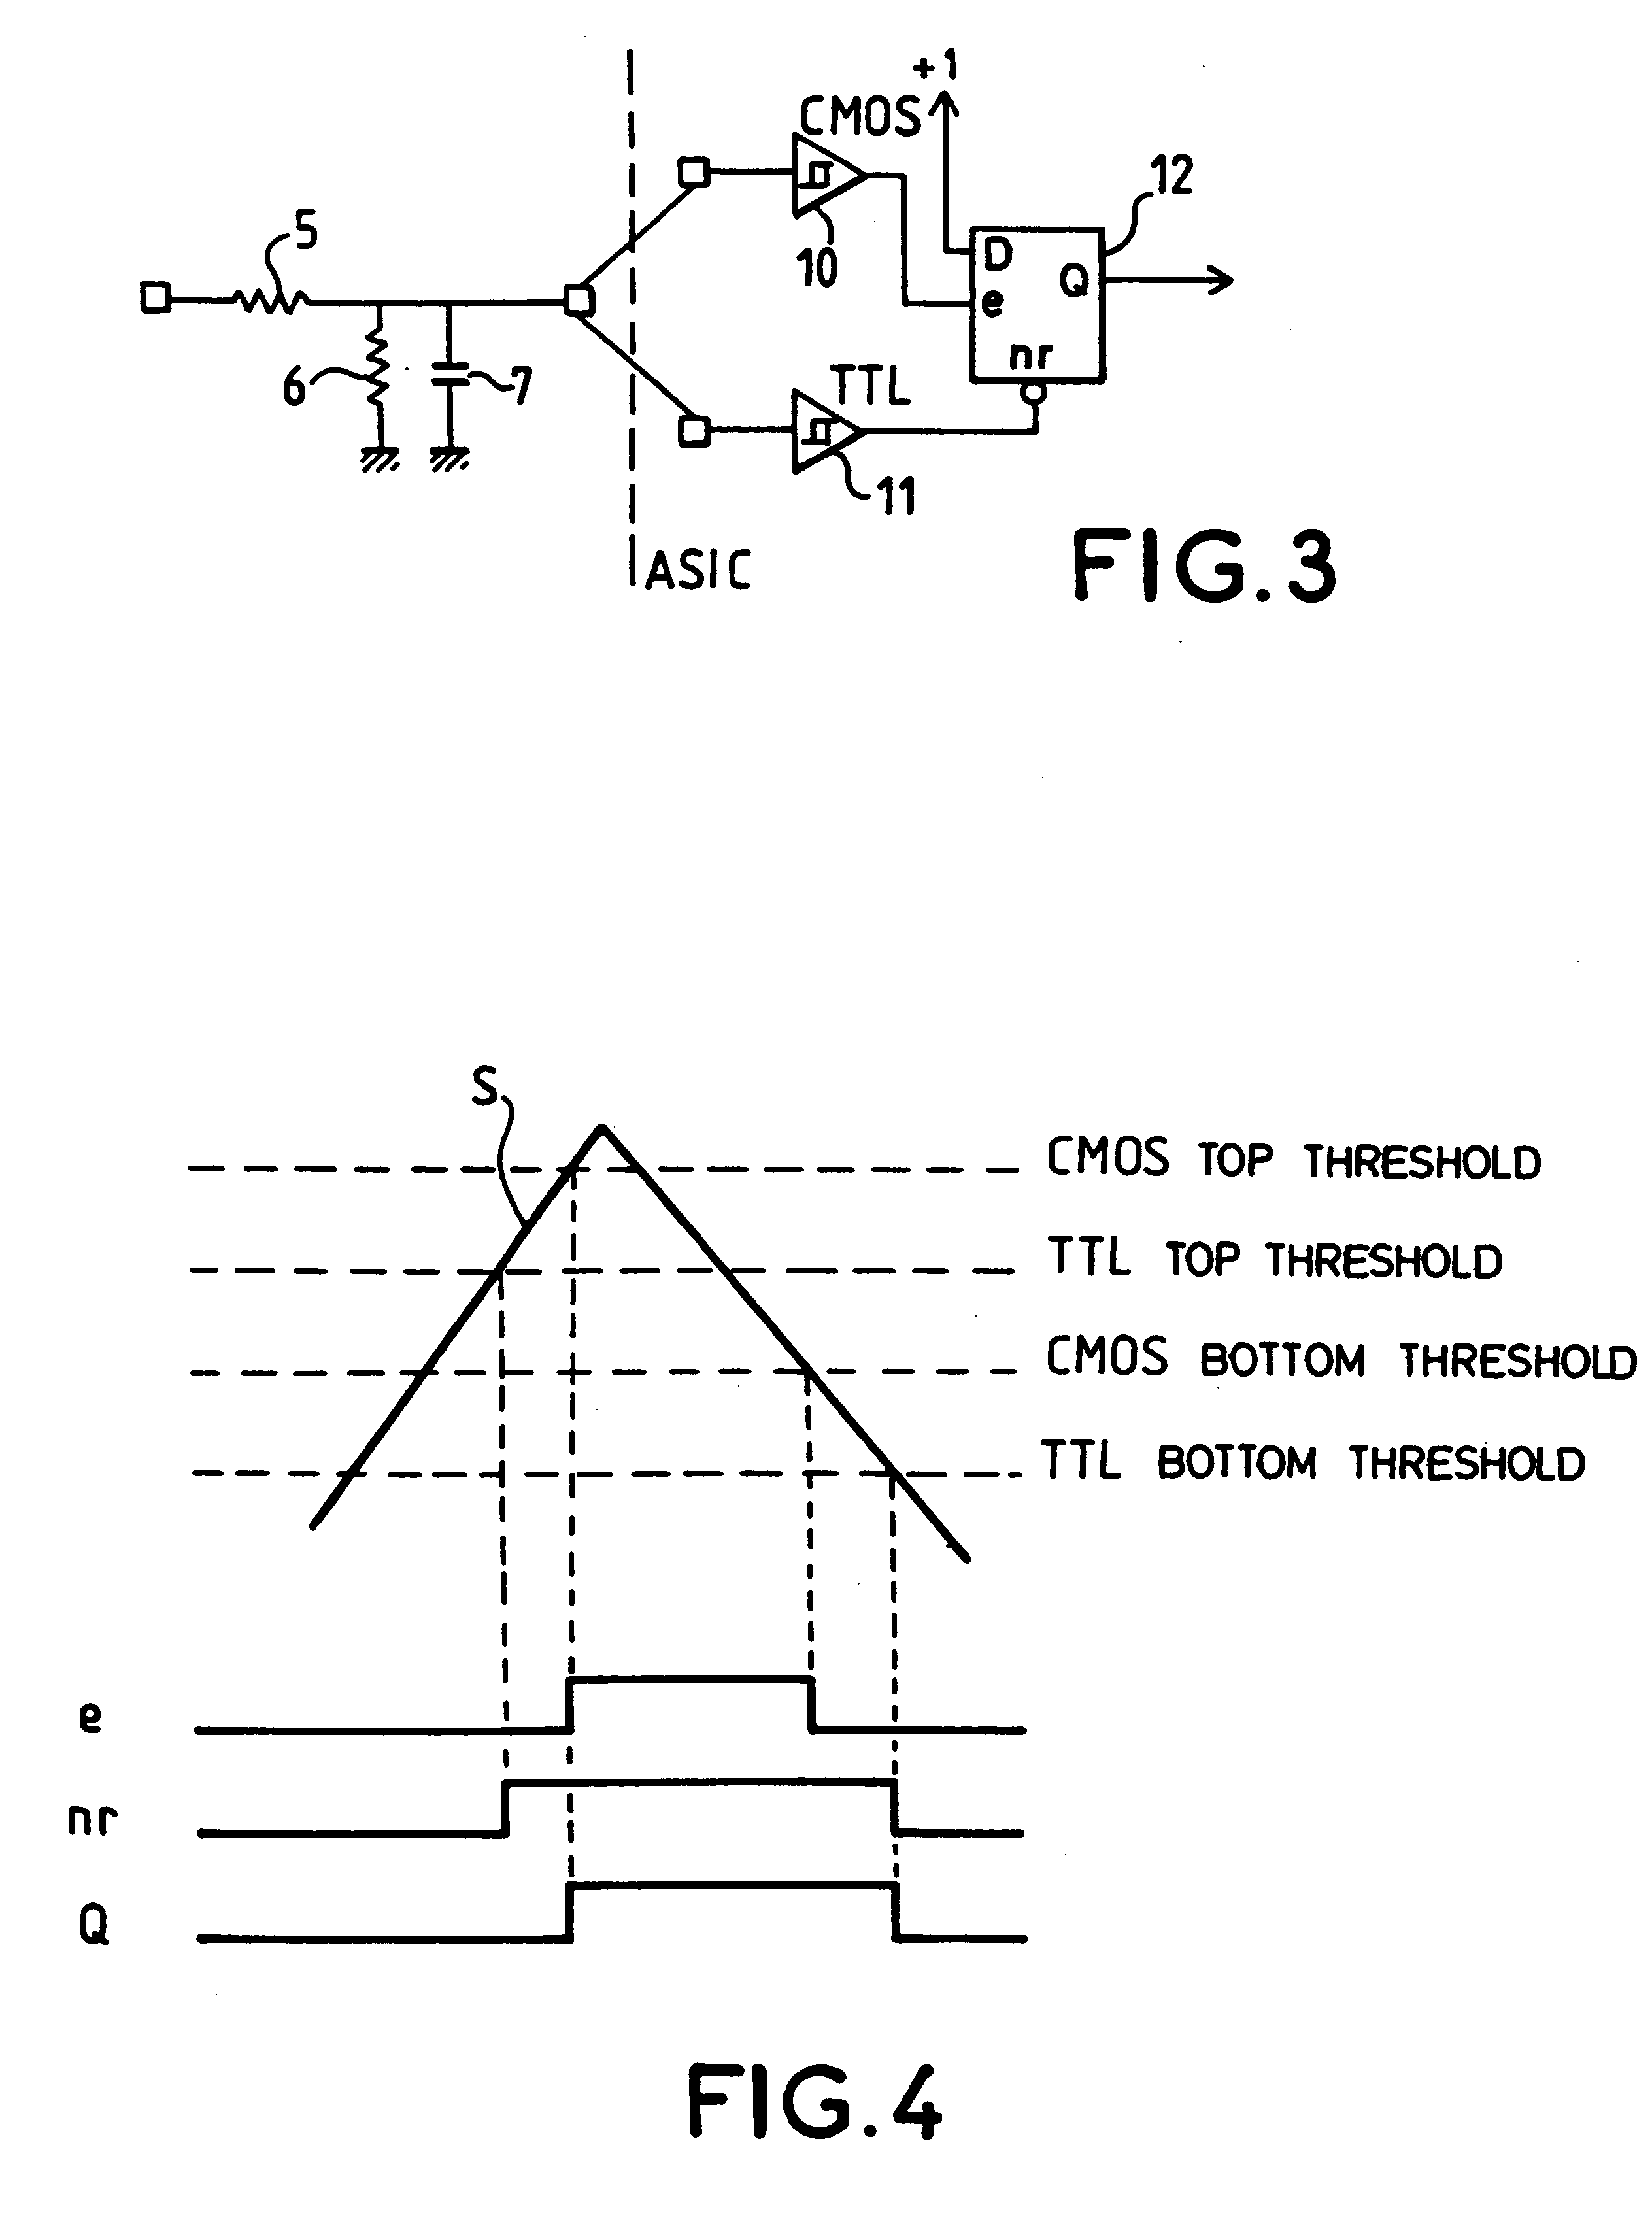 Circuit for the acquisition of binary analog signals